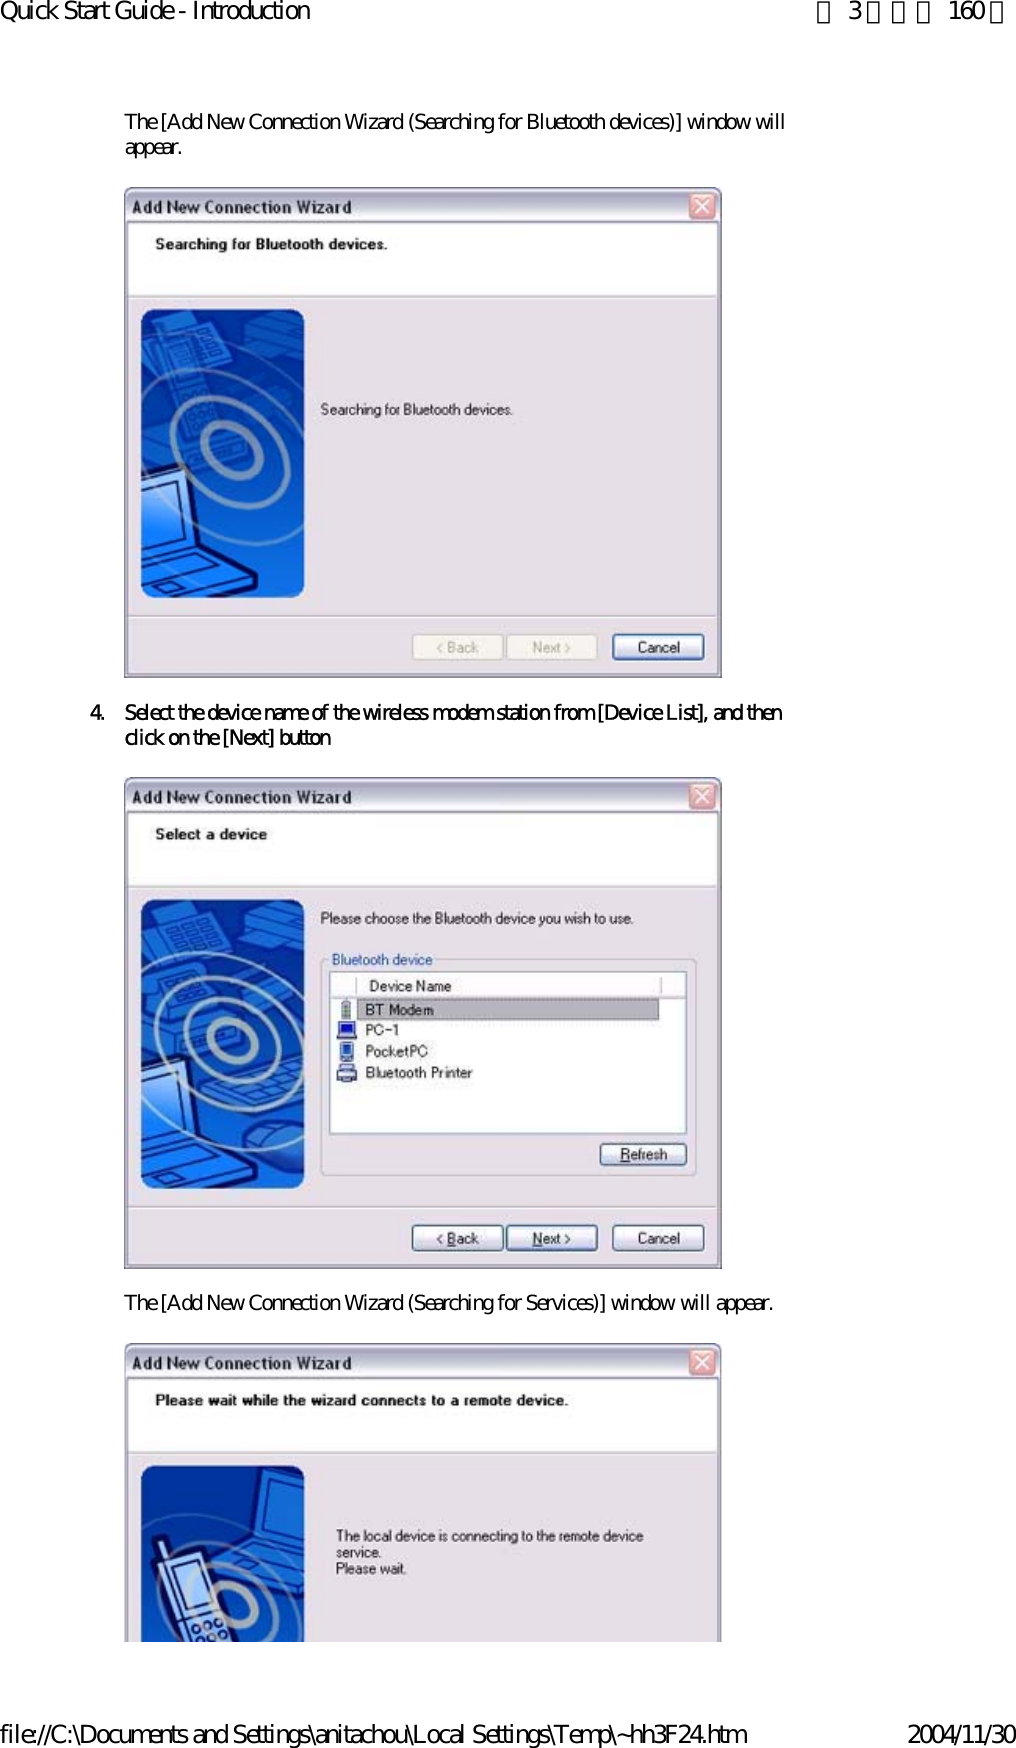 Quick Start Guide - Introduction 第 3 頁，共 160 頁file://C:\Documents and Settings\anitachou\Local Settings\Temp\~hh3F24.htm 2004/11/30The [Add New Connection Wizard (Searching for Bluetooth devices)] window will appear.4. Select the device name of the wireless modem station from [Device List], and then click on the [Next] buttonThe [Add New Connection Wizard (Searching for Services)] window will appear.